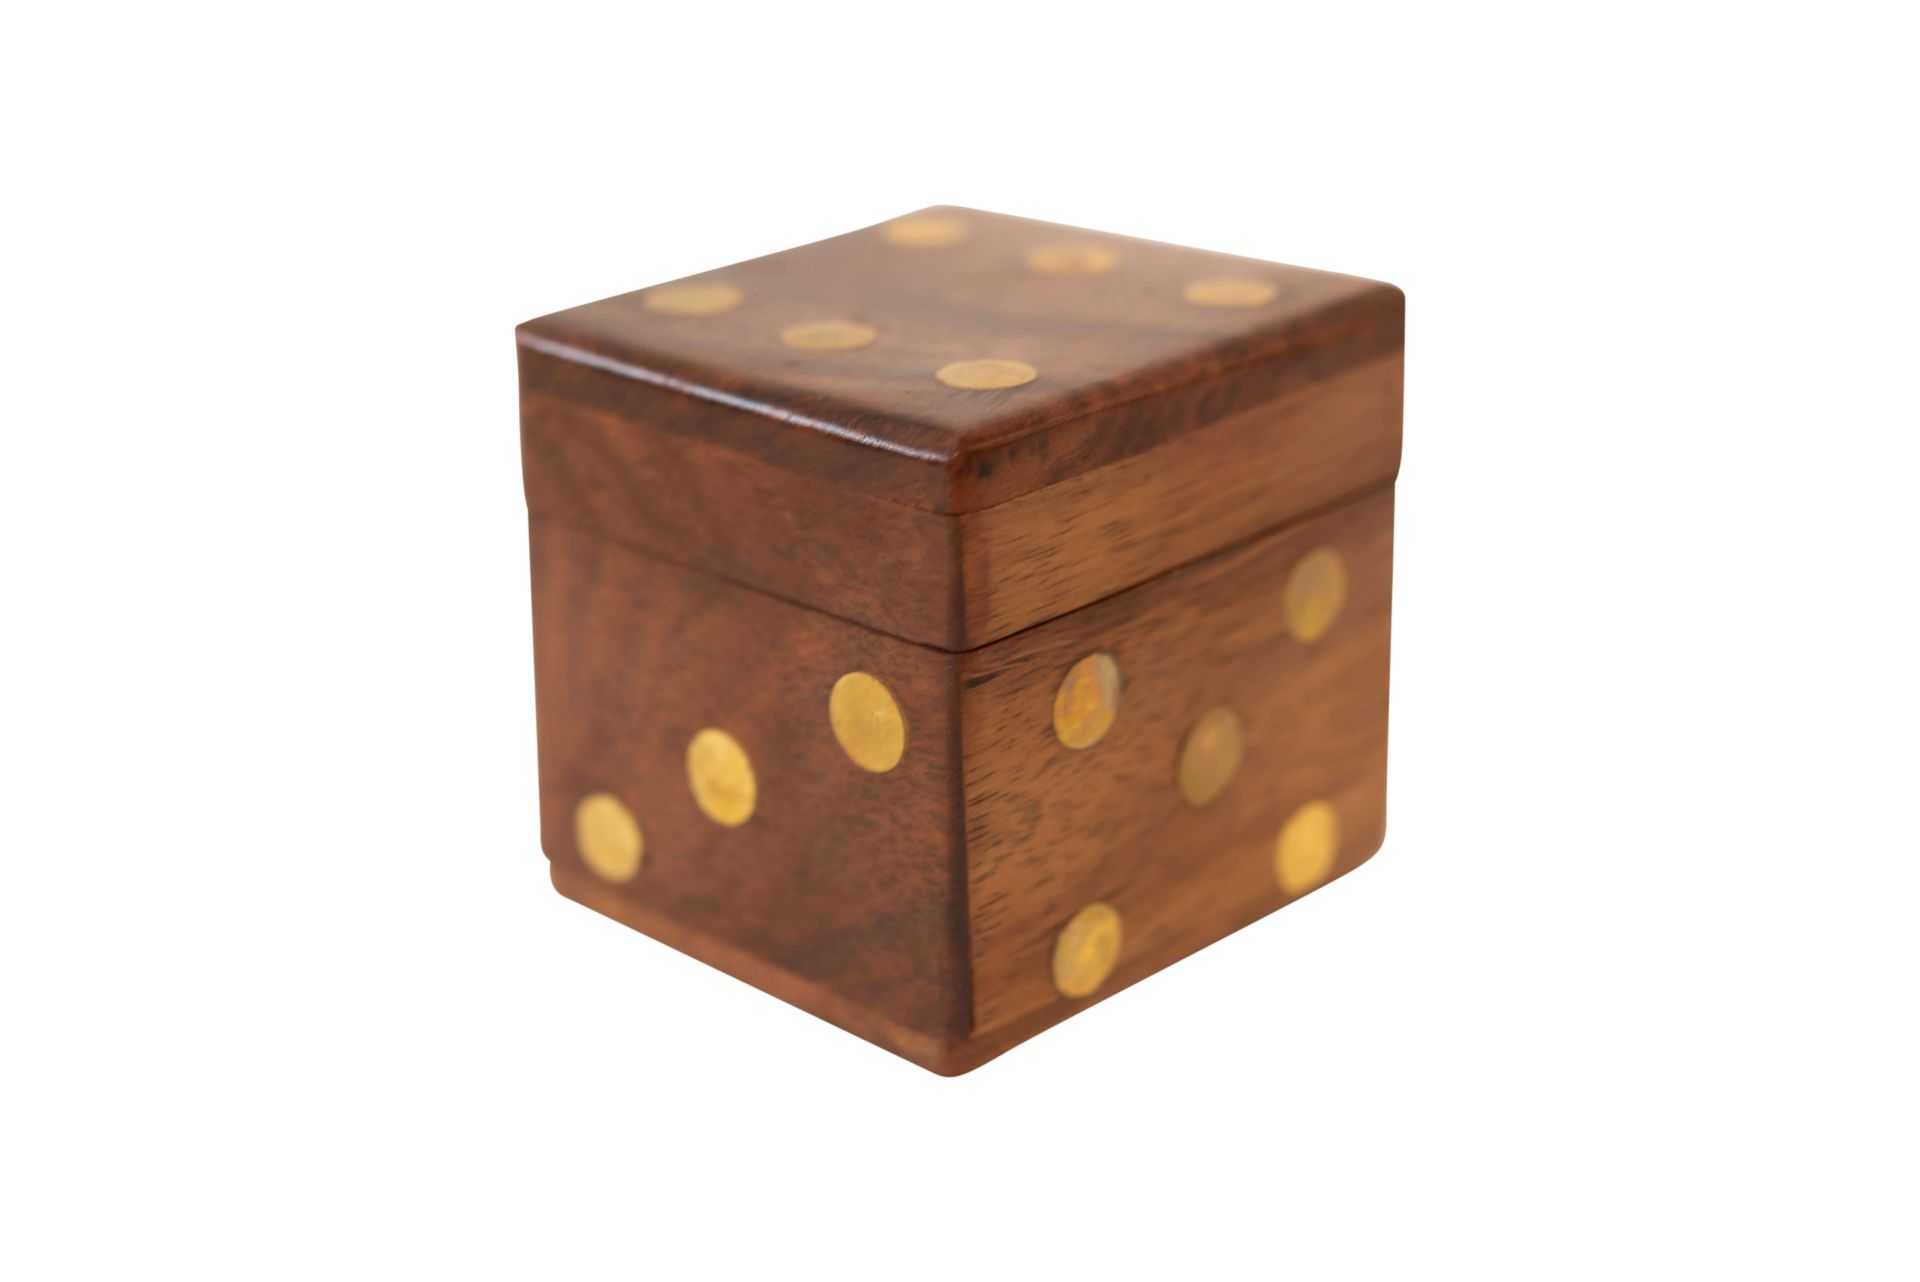 Holzkiste aus Rosenholz mit Würfeln und Messing Punkten | Wooden Box Made of Rosewood with Cubes and